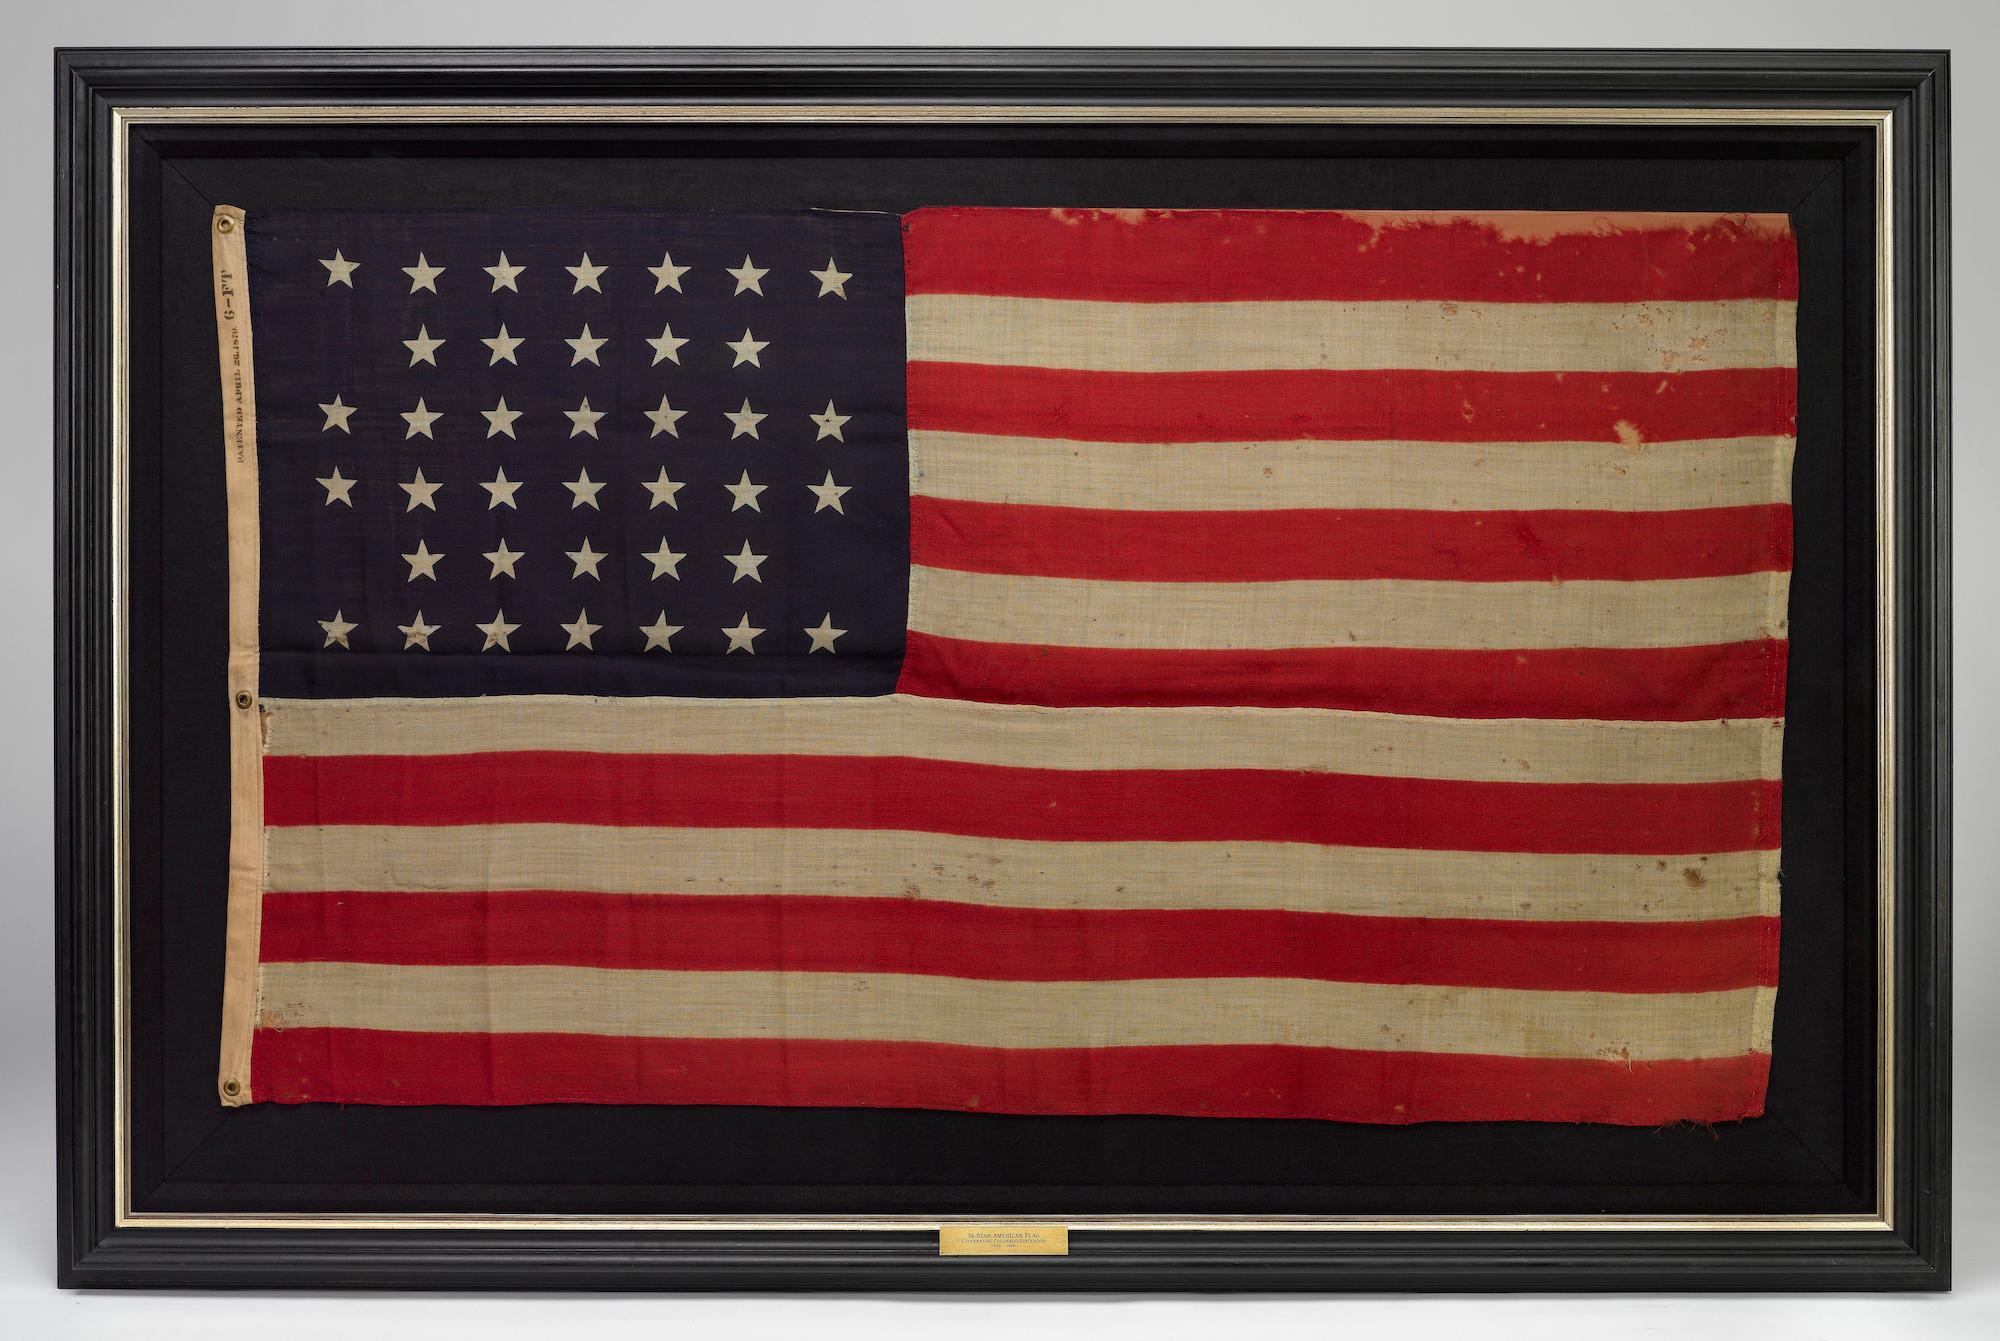 This is an original 38-star American flag. The flag dates to 1876, when Colorado joined the Union as the 38th state. The flag has a wool bunting canton with 38 clamp-dyed stars, configured in an unusual notched pattern. The star pattern features